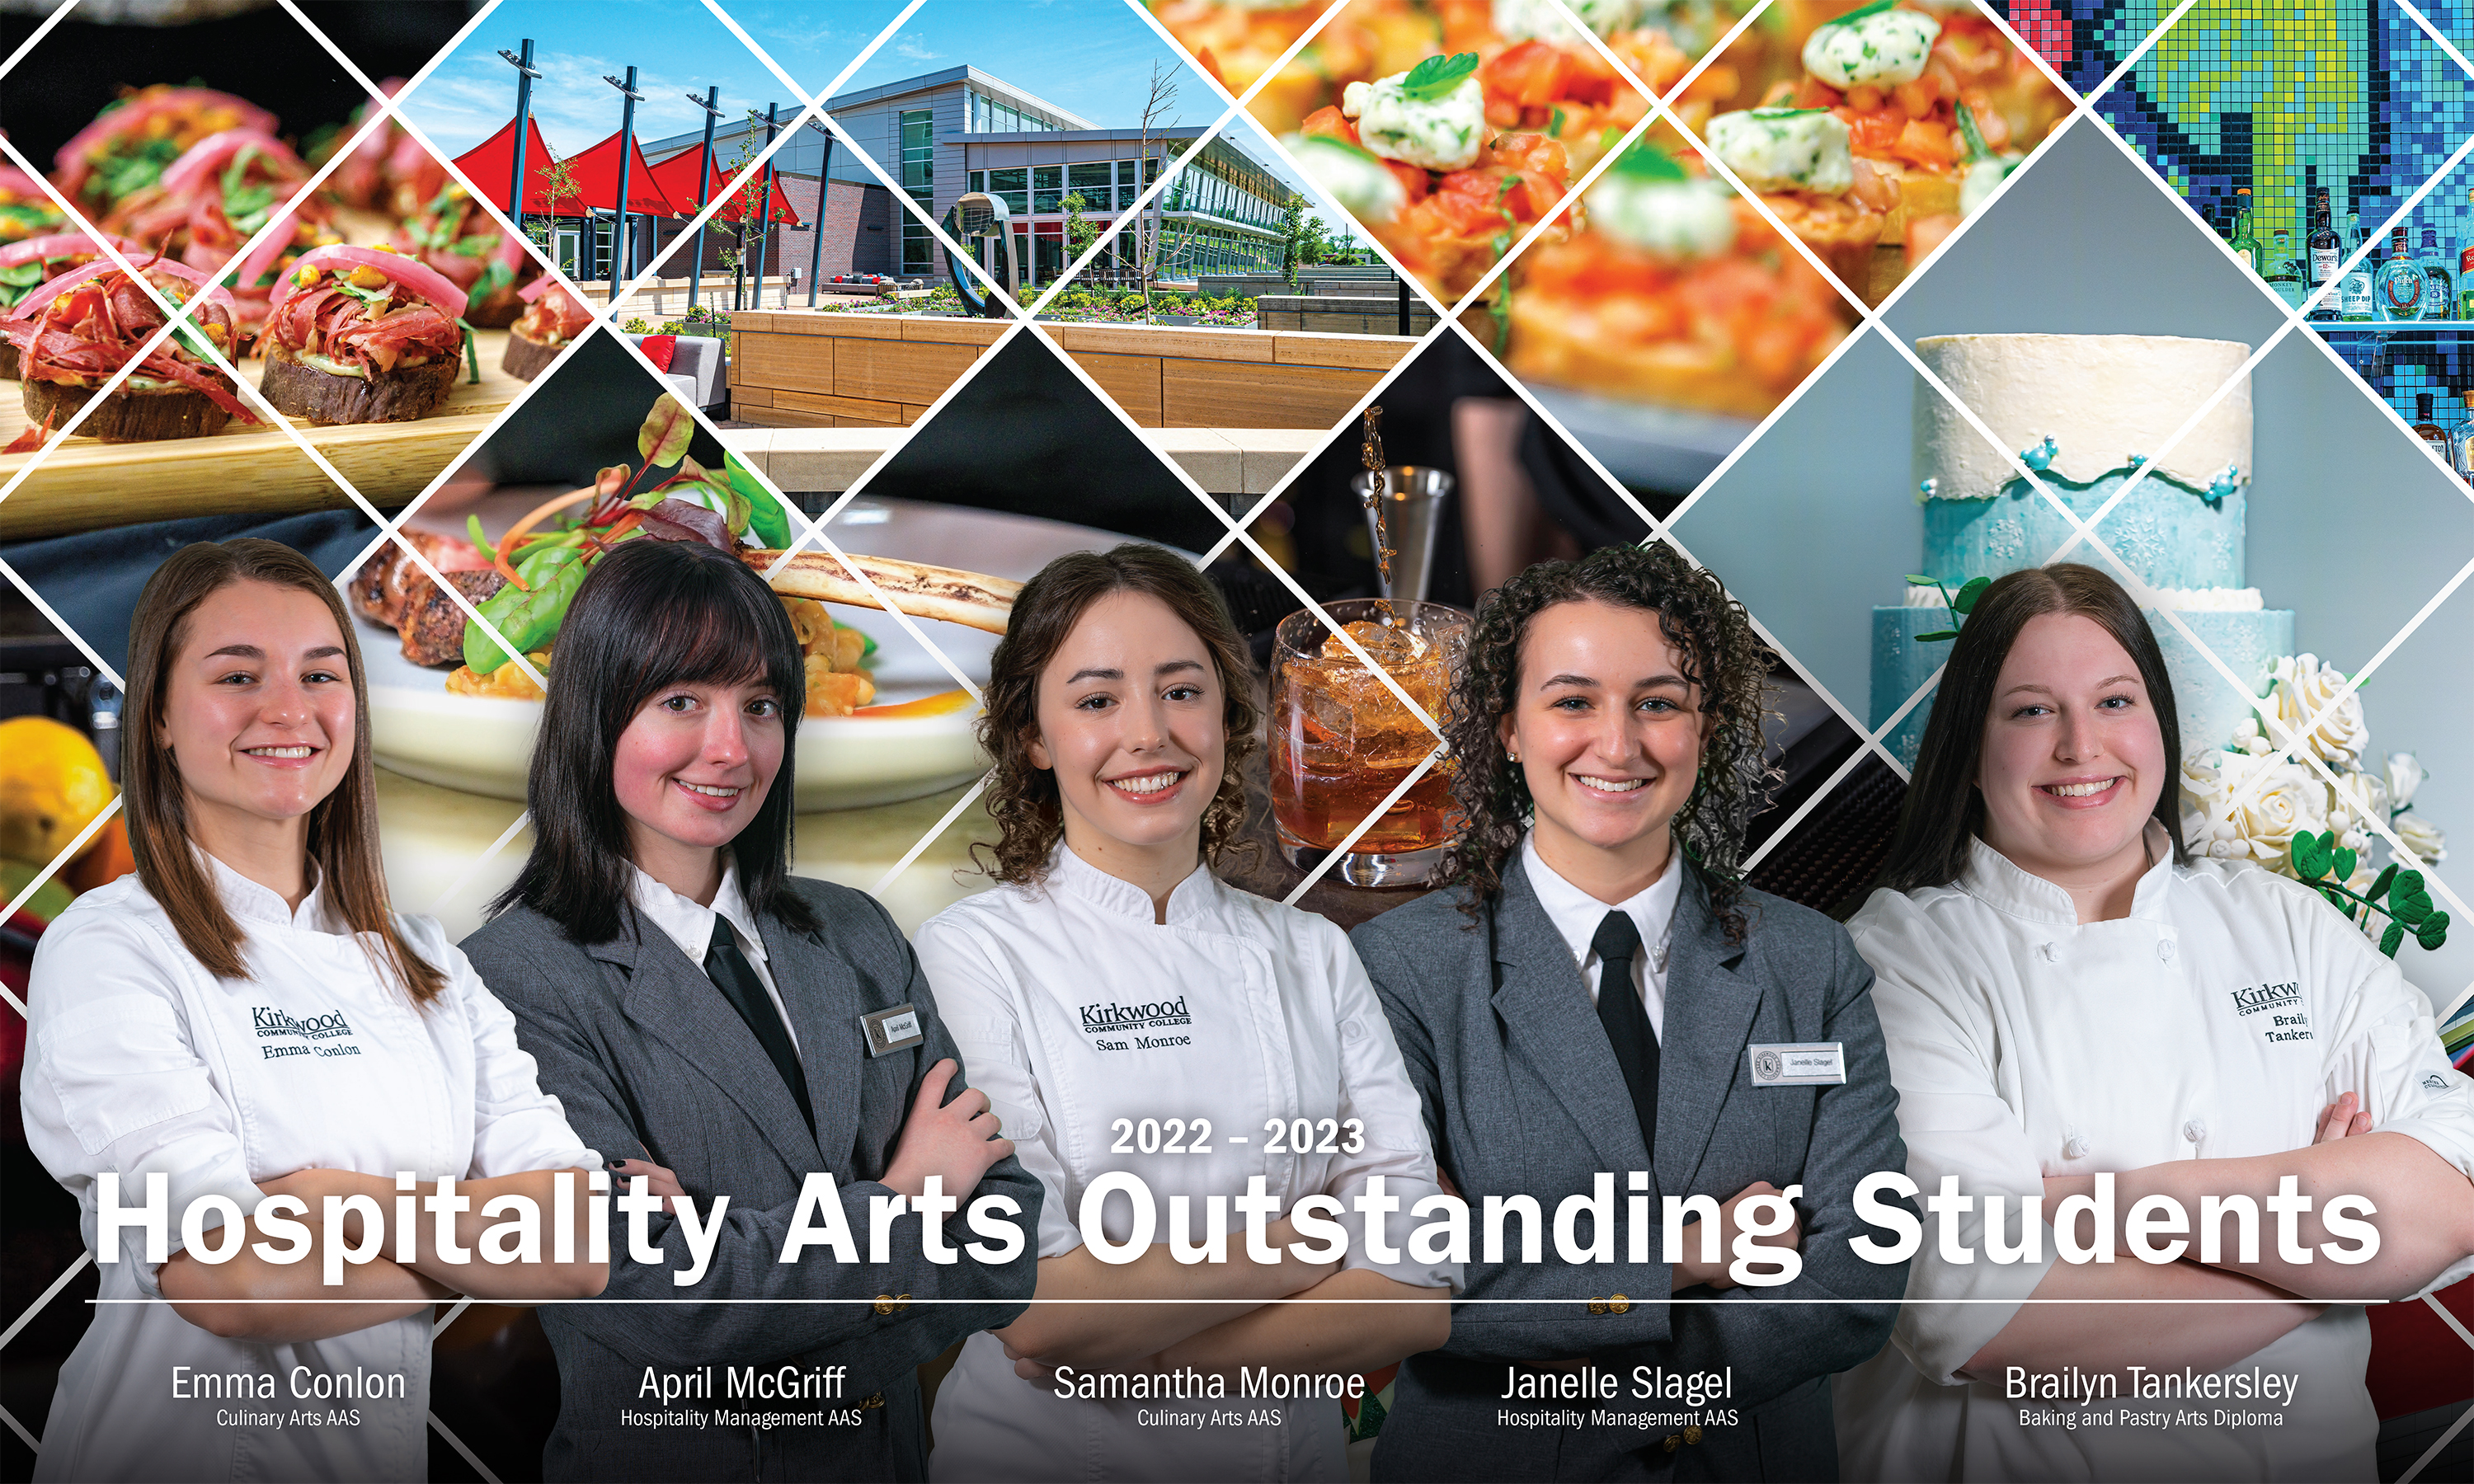 Hospitality Arts Outstanding Students: Emma Conlon, Culinary Arts AAS, April McGriff, Hospitality Management AAS, Samantha Monroe, Culinary Arts AAS, Janelle Slagel, Hospitality Management AAS, Brailyn Tankersley, Baking and Pastry Arts Diploma